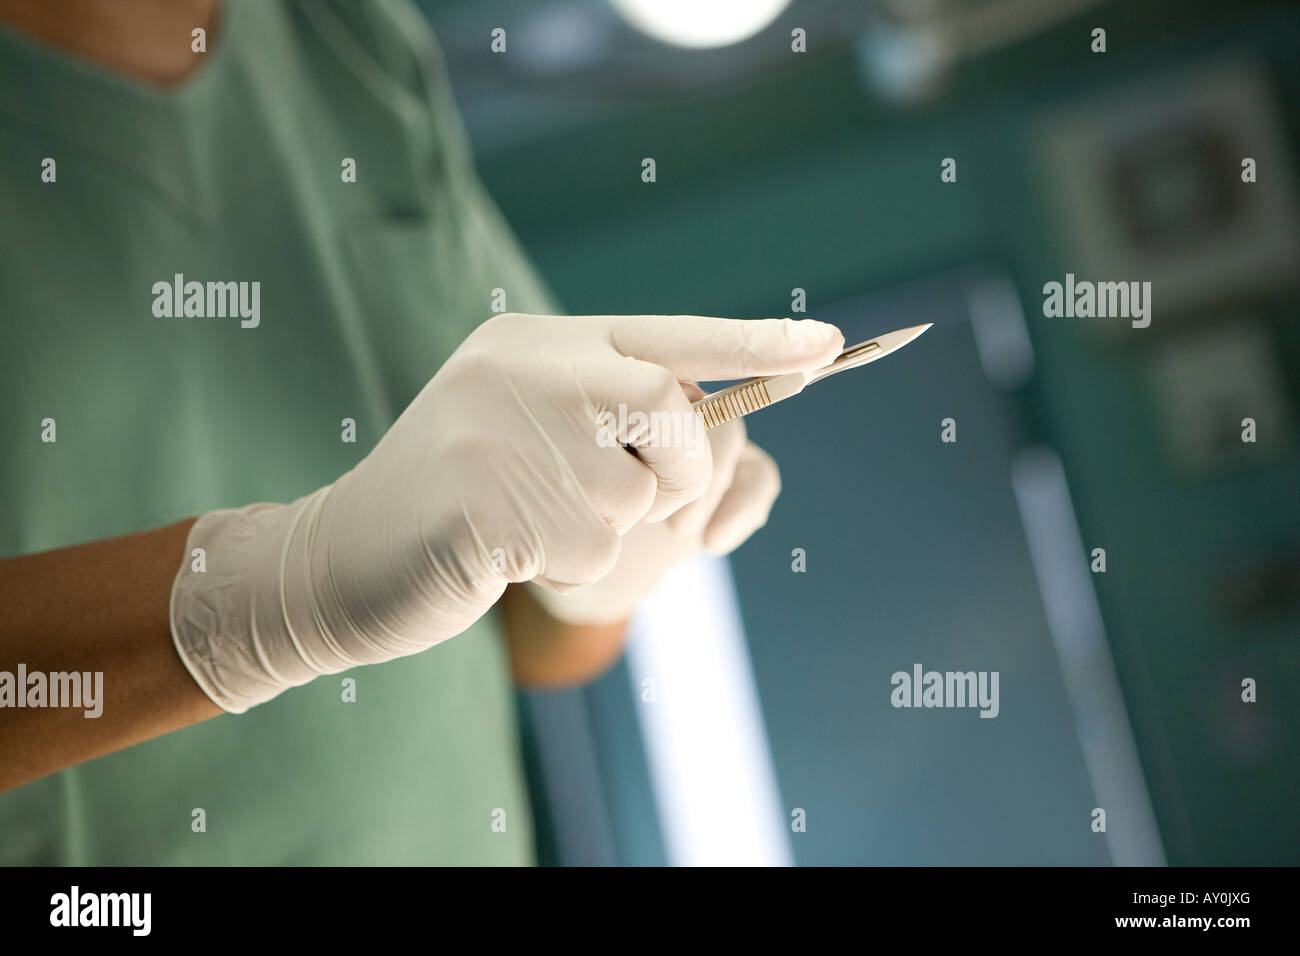 Doctor holding scalpel Banque D'Images